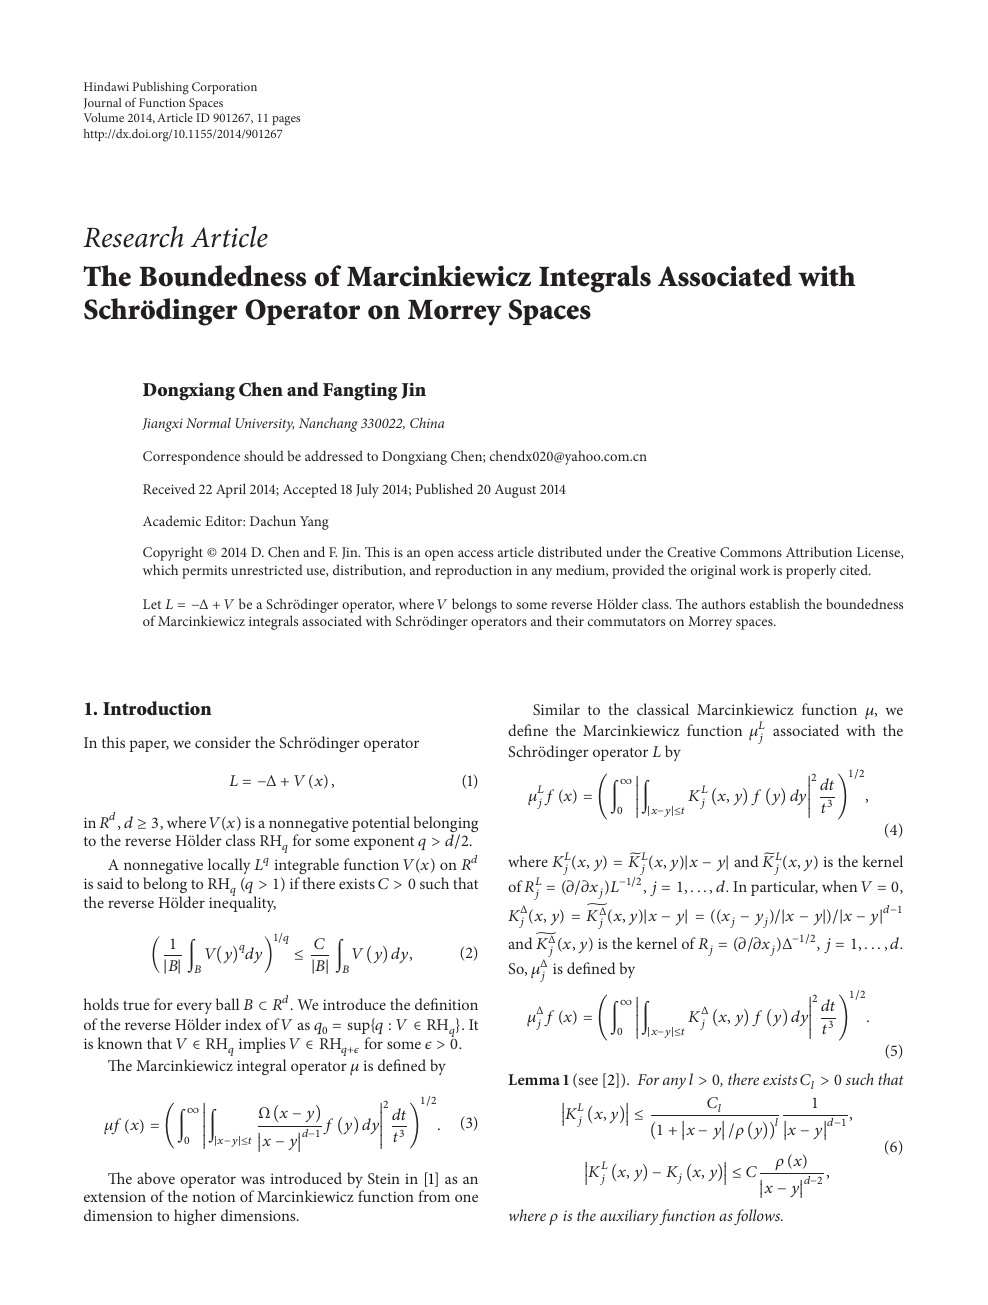 The Boundedness Of Marcinkiewicz Integrals Associated With Schrodinger Operator On Morrey Spaces Topic Of Research Paper In Mathematics Download Scholarly Article Pdf And Read For Free On Cyberleninka Open Science Hub